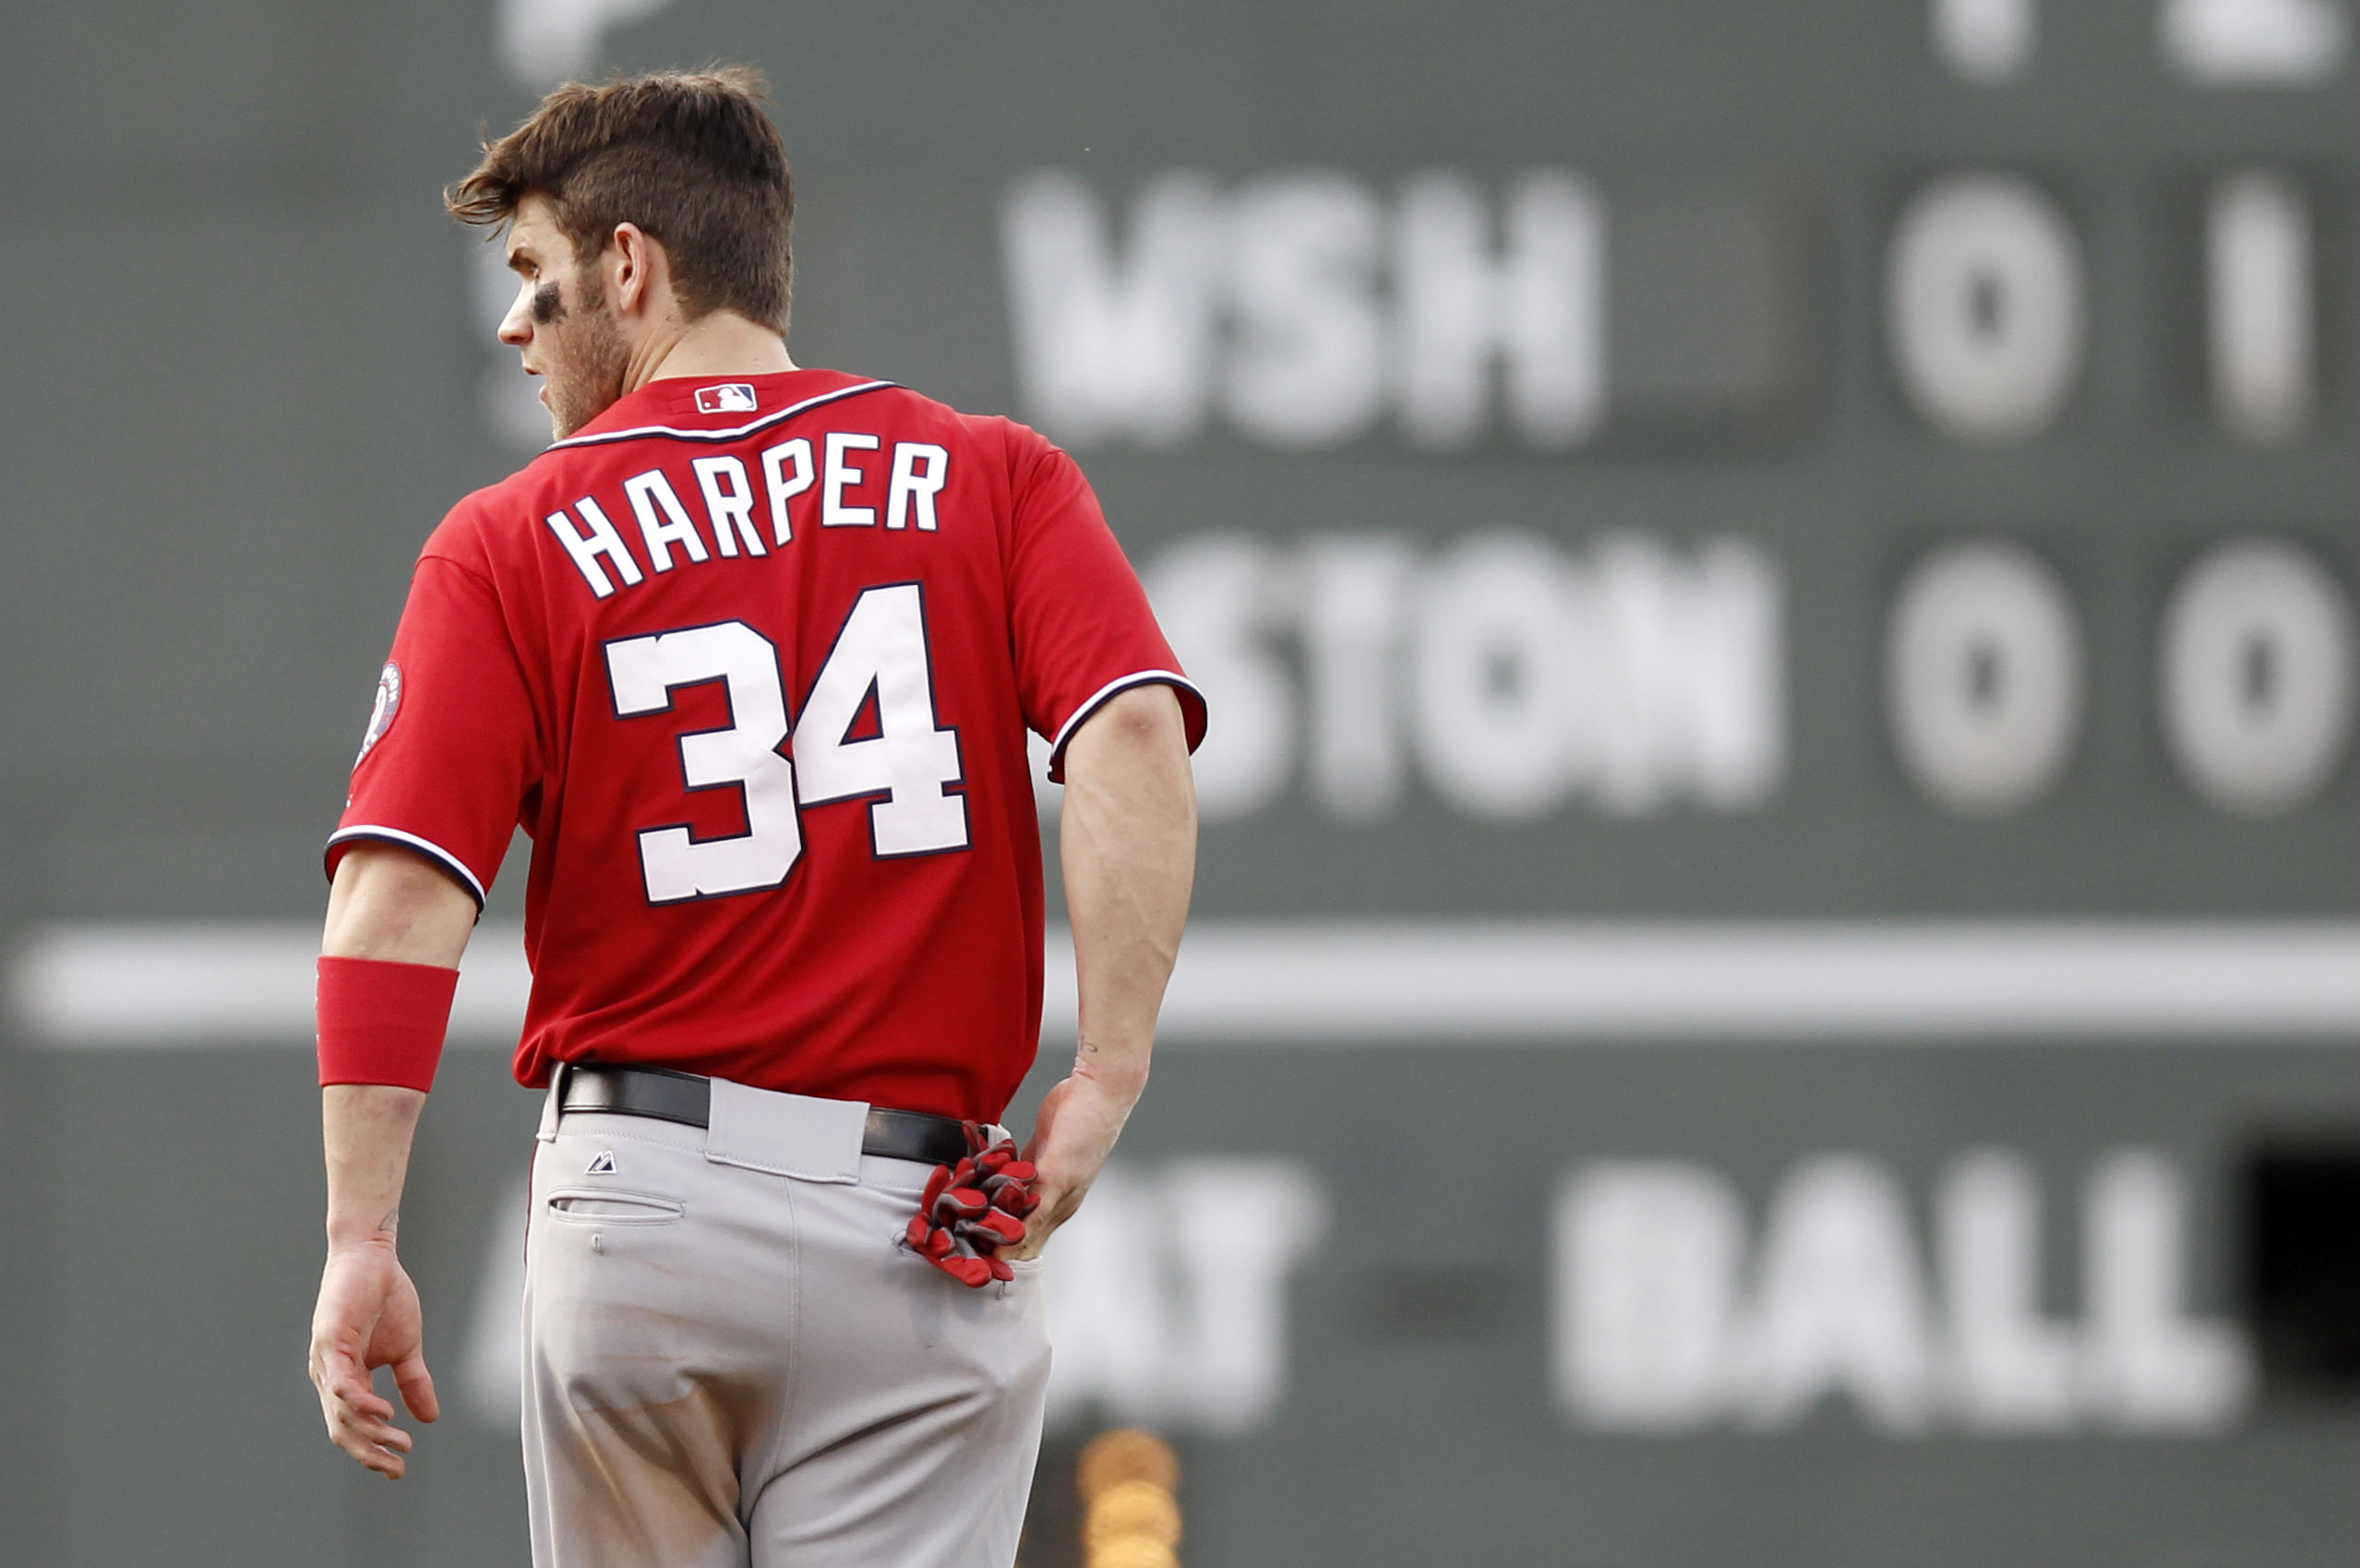 Washington Nationals #34 Bryce Harper Gray Jersey on sale,for